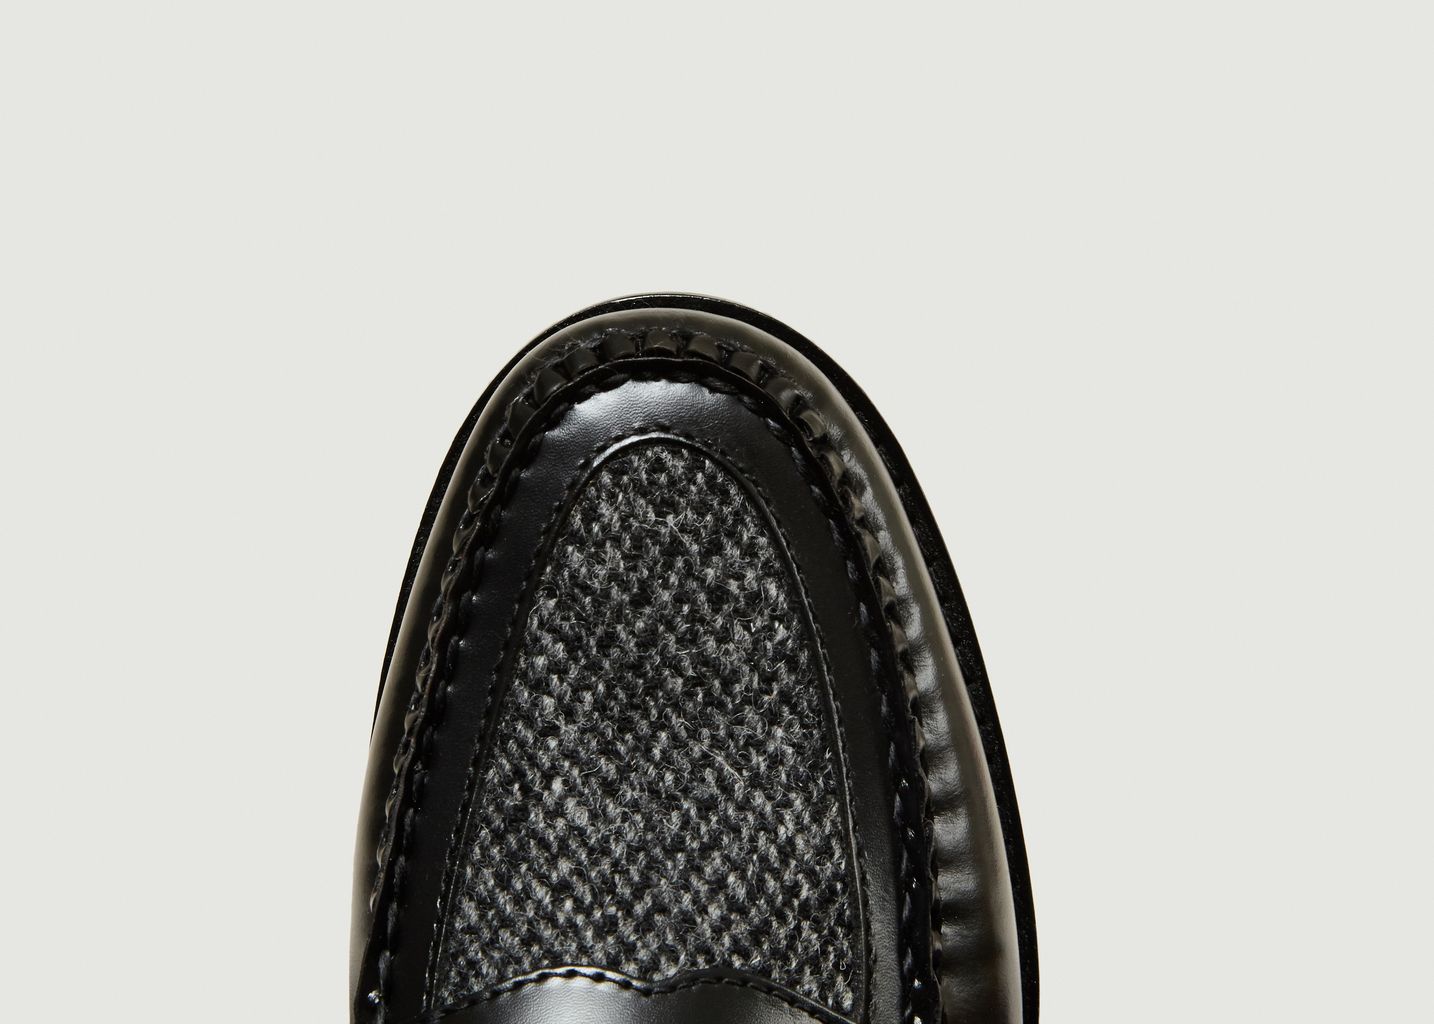 Weejuns Whitney Harris Tweed Loafers - G.H.Bass